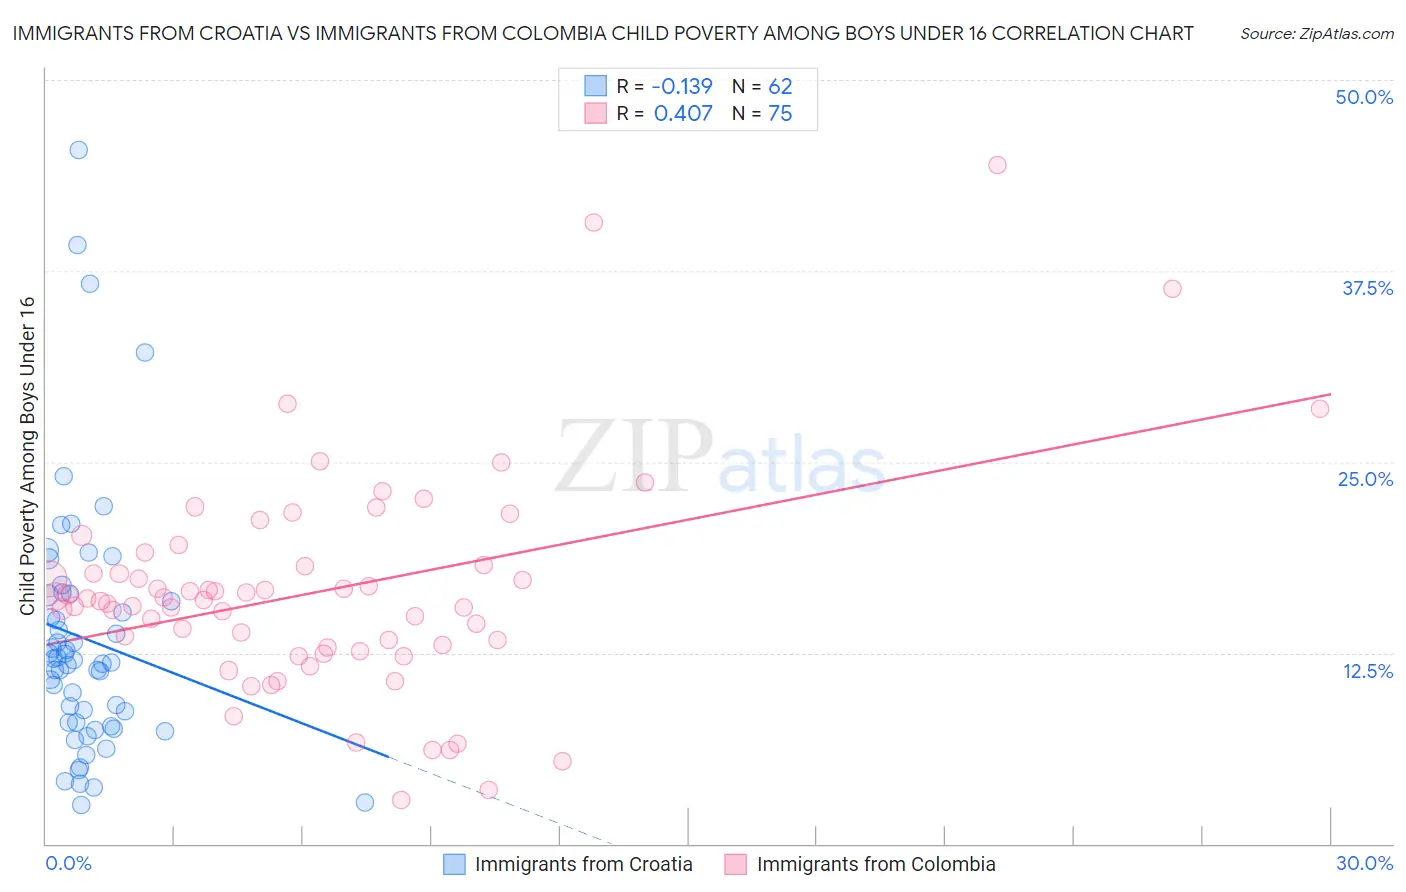 Immigrants from Croatia vs Immigrants from Colombia Child Poverty Among Boys Under 16